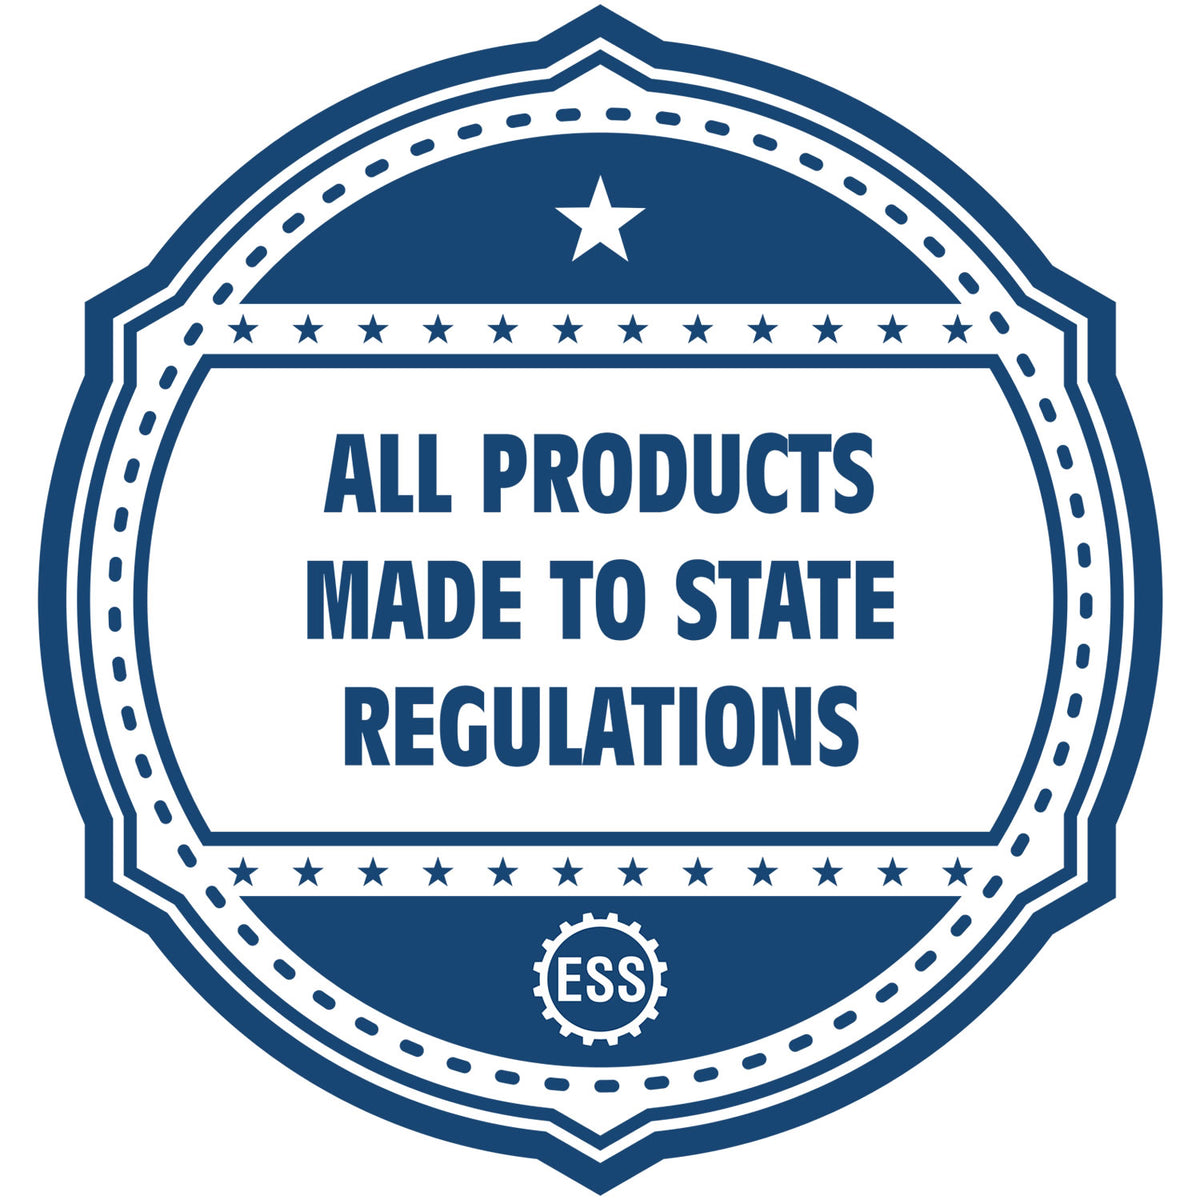 An icon or badge element for the Handheld North Carolina Professional Engineer Embosser showing that this product is made in compliance with state regulations.